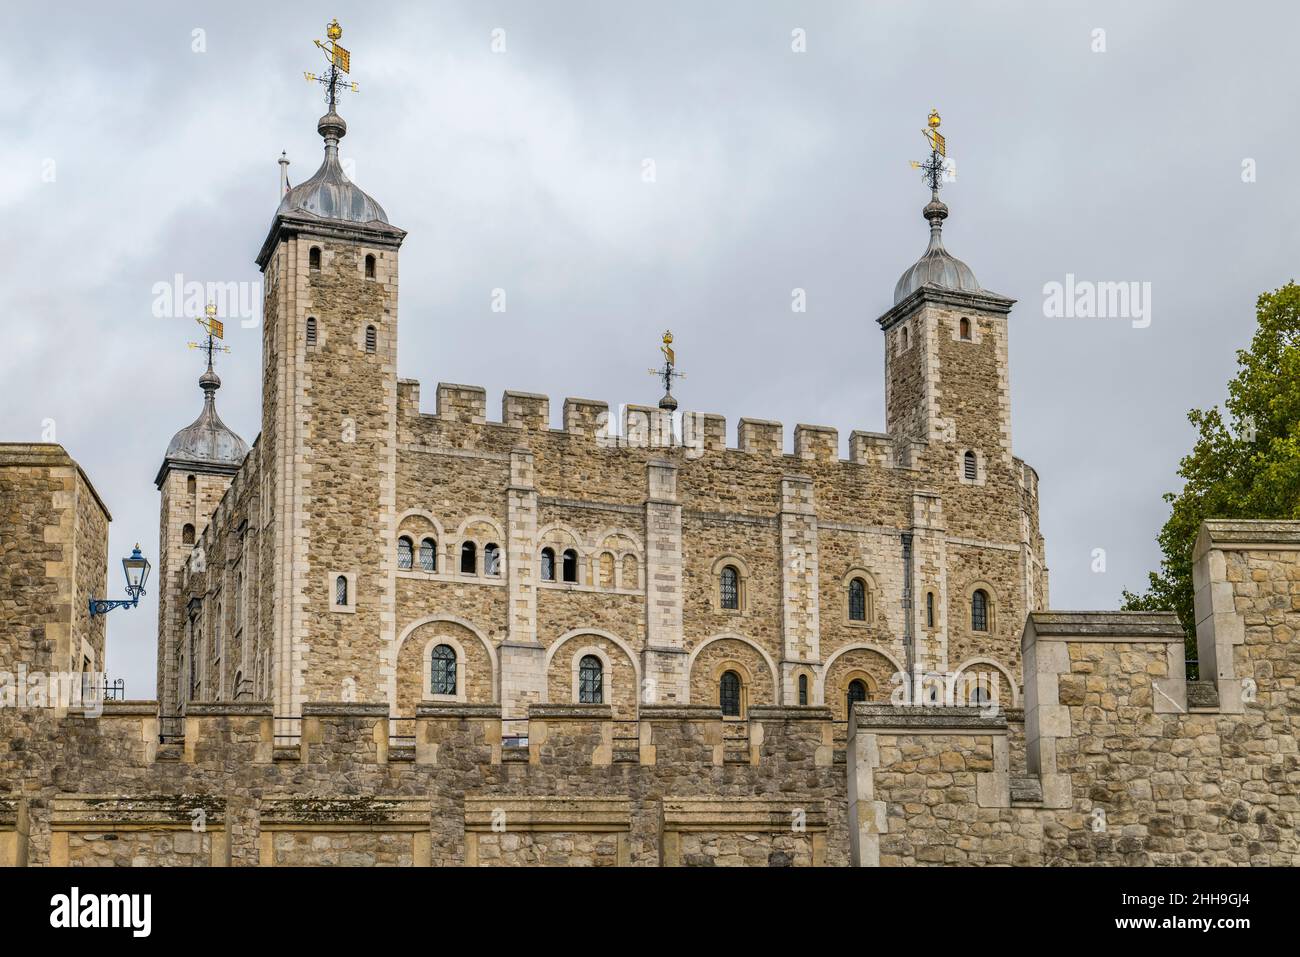 TOWER OF LONDON (1100 AD) LONDRES ROYAUME-UNI Banque D'Images